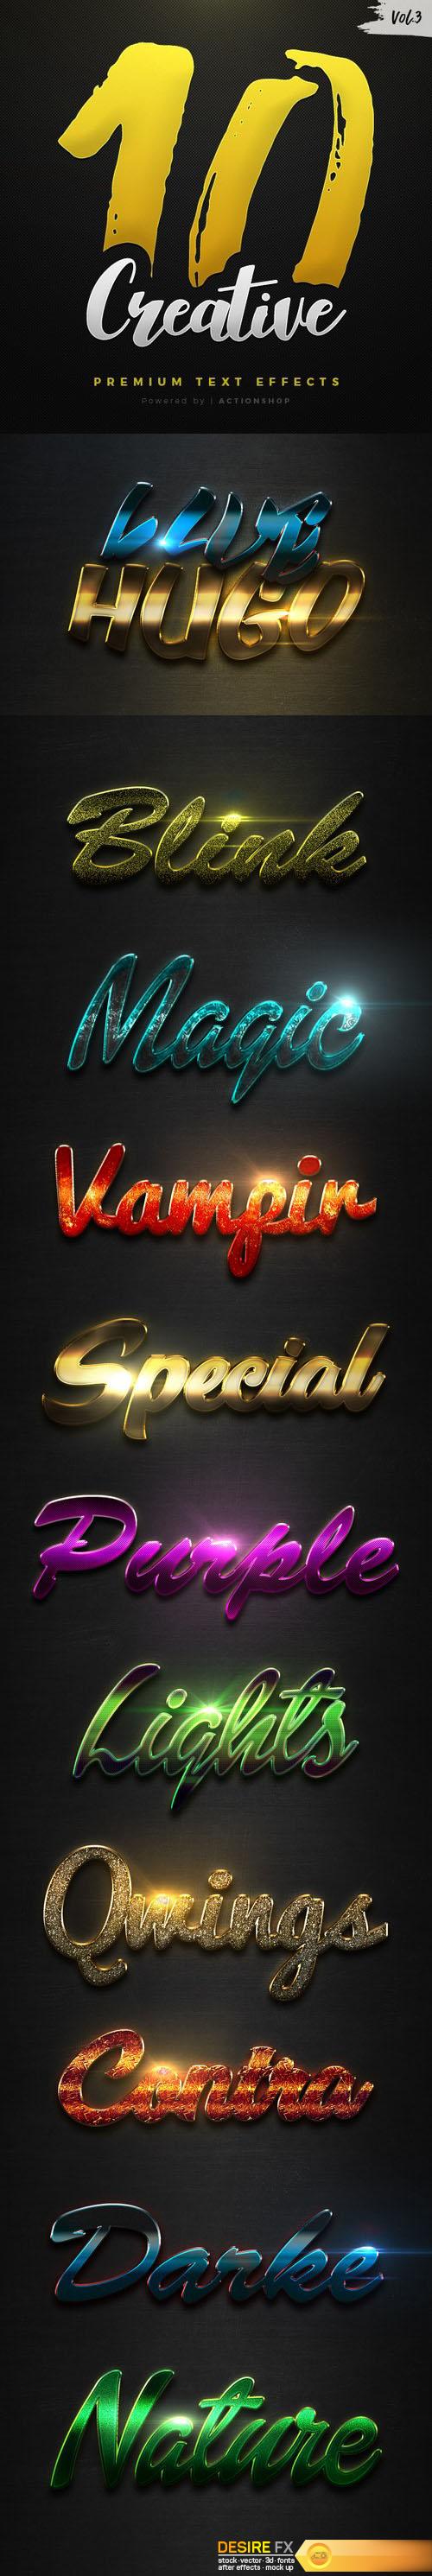 graphicriver-20994151-10-creative-text-effects-vol3